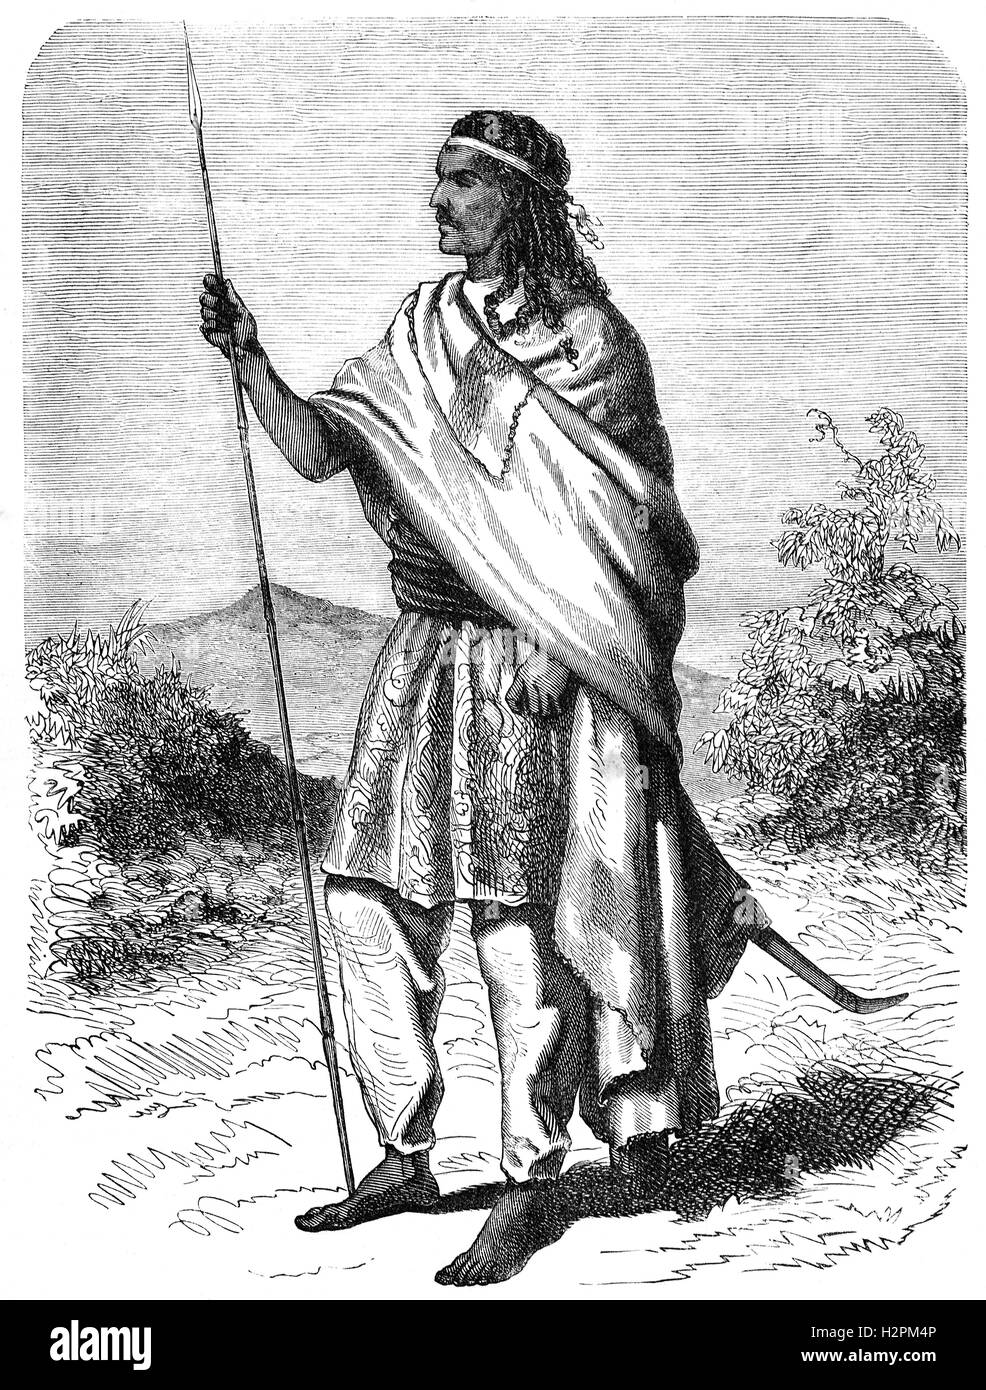 Téwodros II  often referred to in English as Theodore II, (1818 – 1868) was the Emperor of Ethiopia from 1855 until his death. Stock Photo